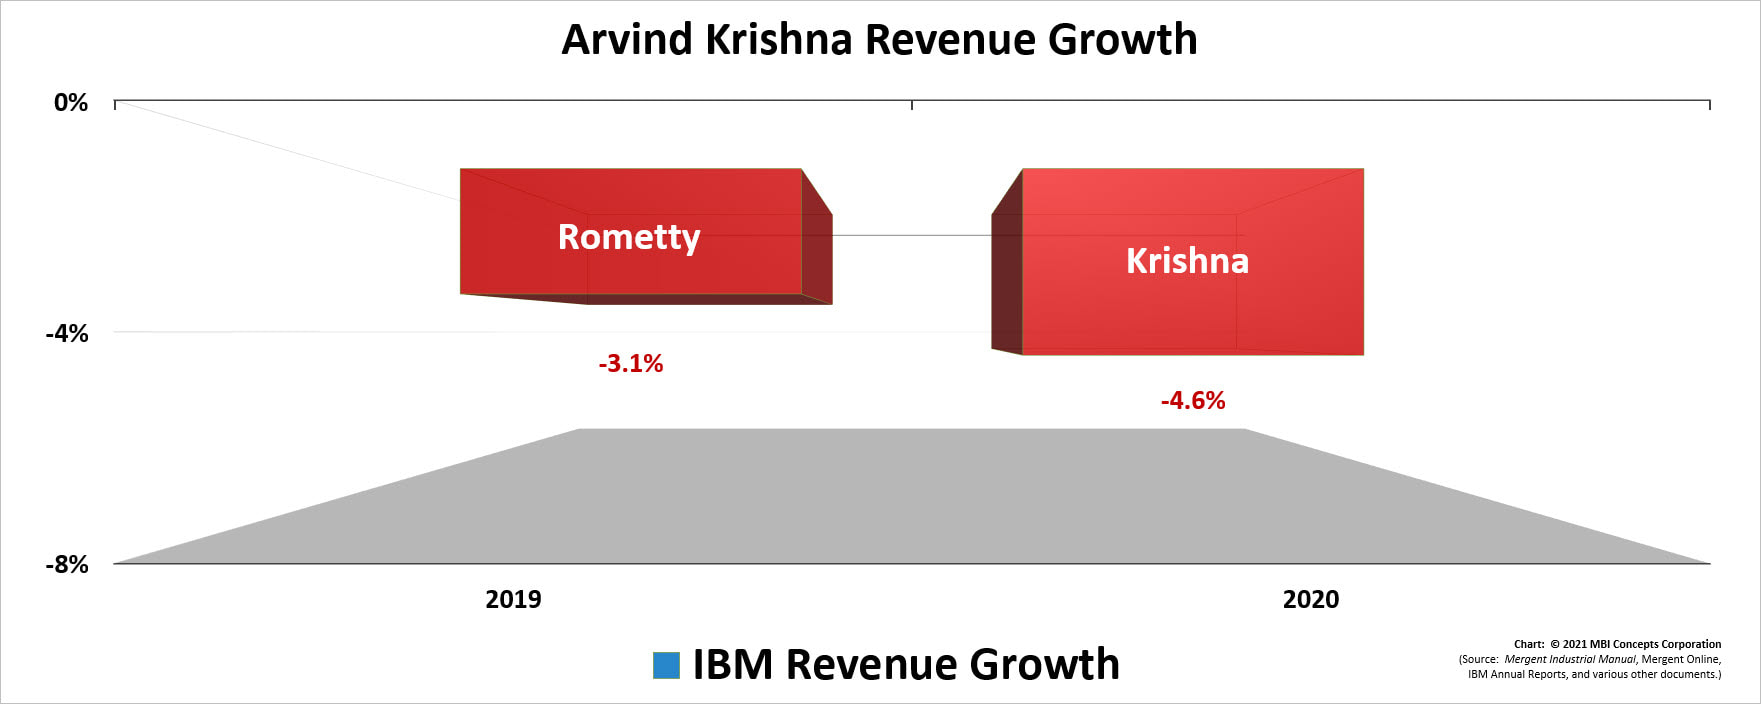 A color bar chart showing IBM's yearly revenue growth for Arvind Krishna in 2020.